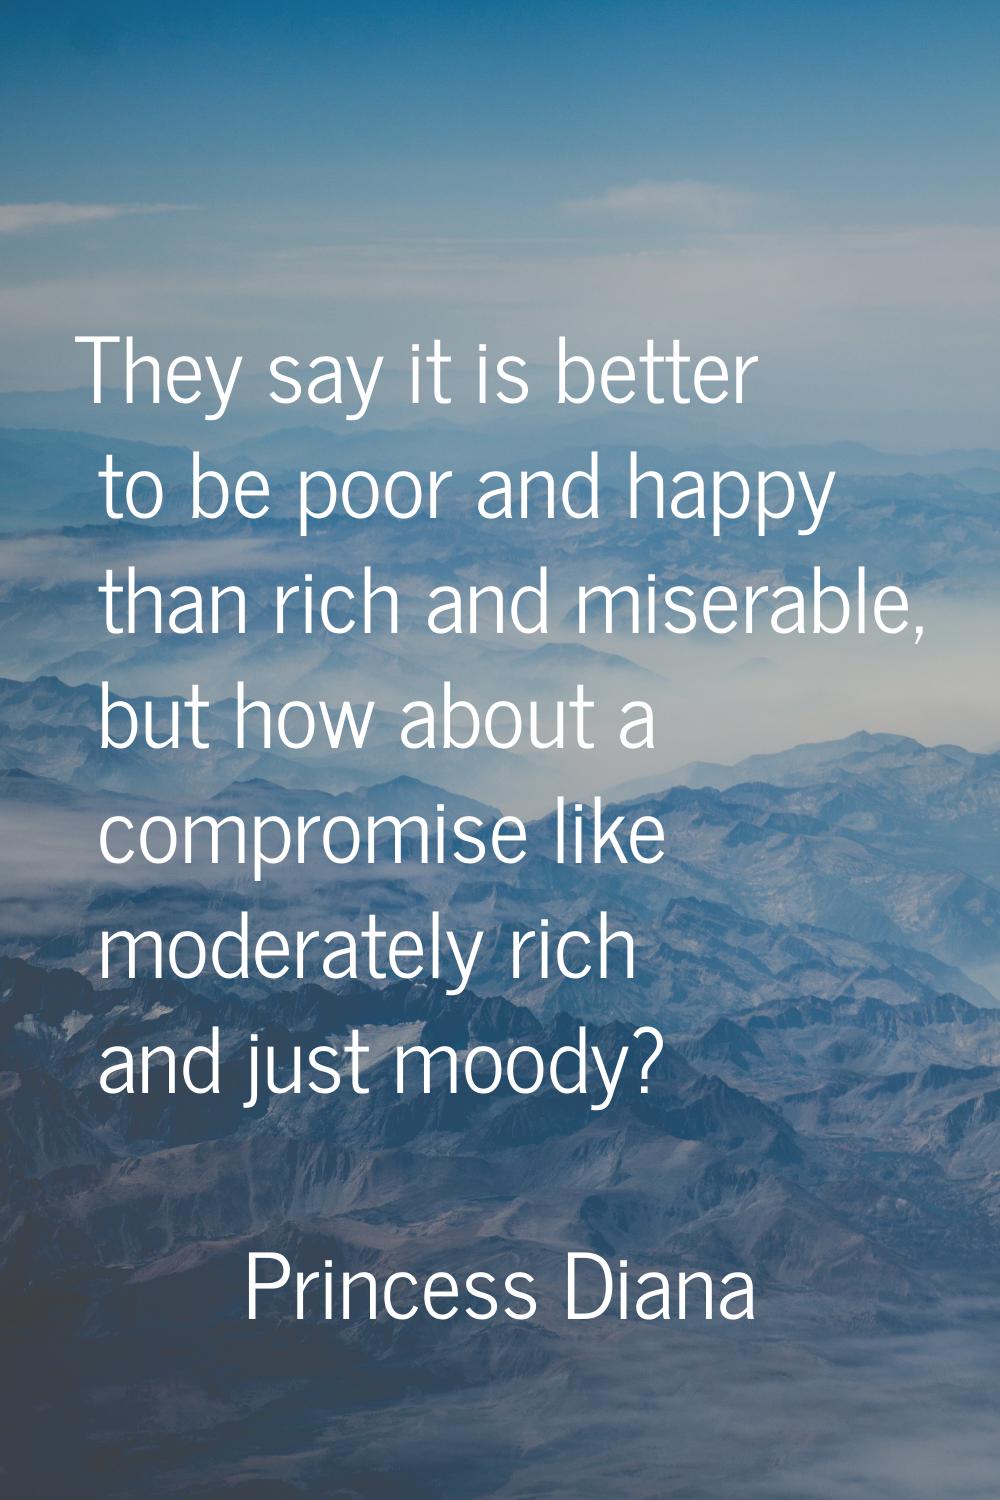 They say it is better to be poor and happy than rich and miserable, but how about a compromise like